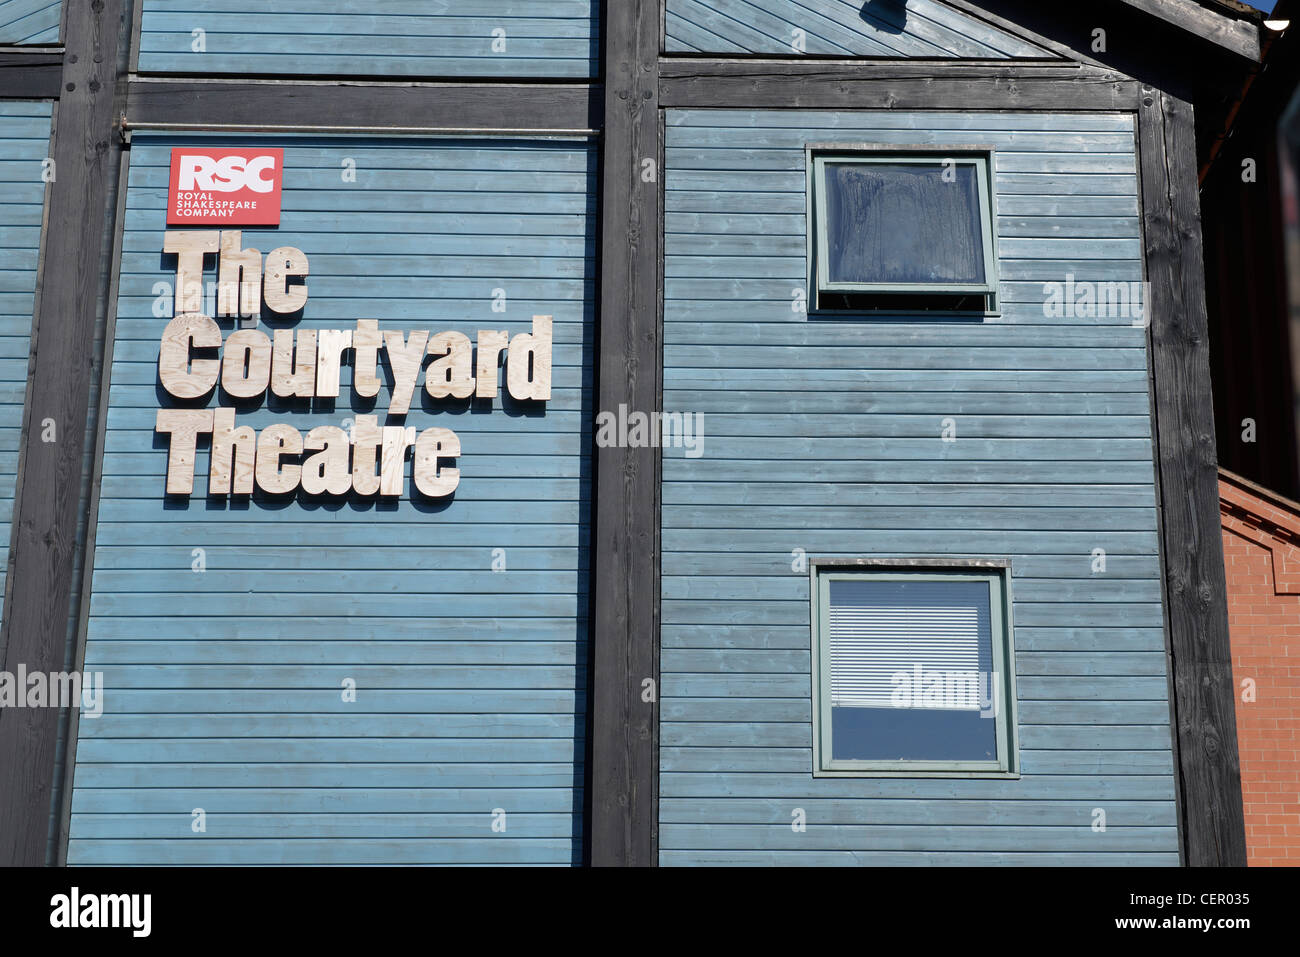 A close up view of The Courtyard Theatre, the RSC's (Royal Shakespeare Company) new theatre, opened in 2006 to allow the company Stock Photo